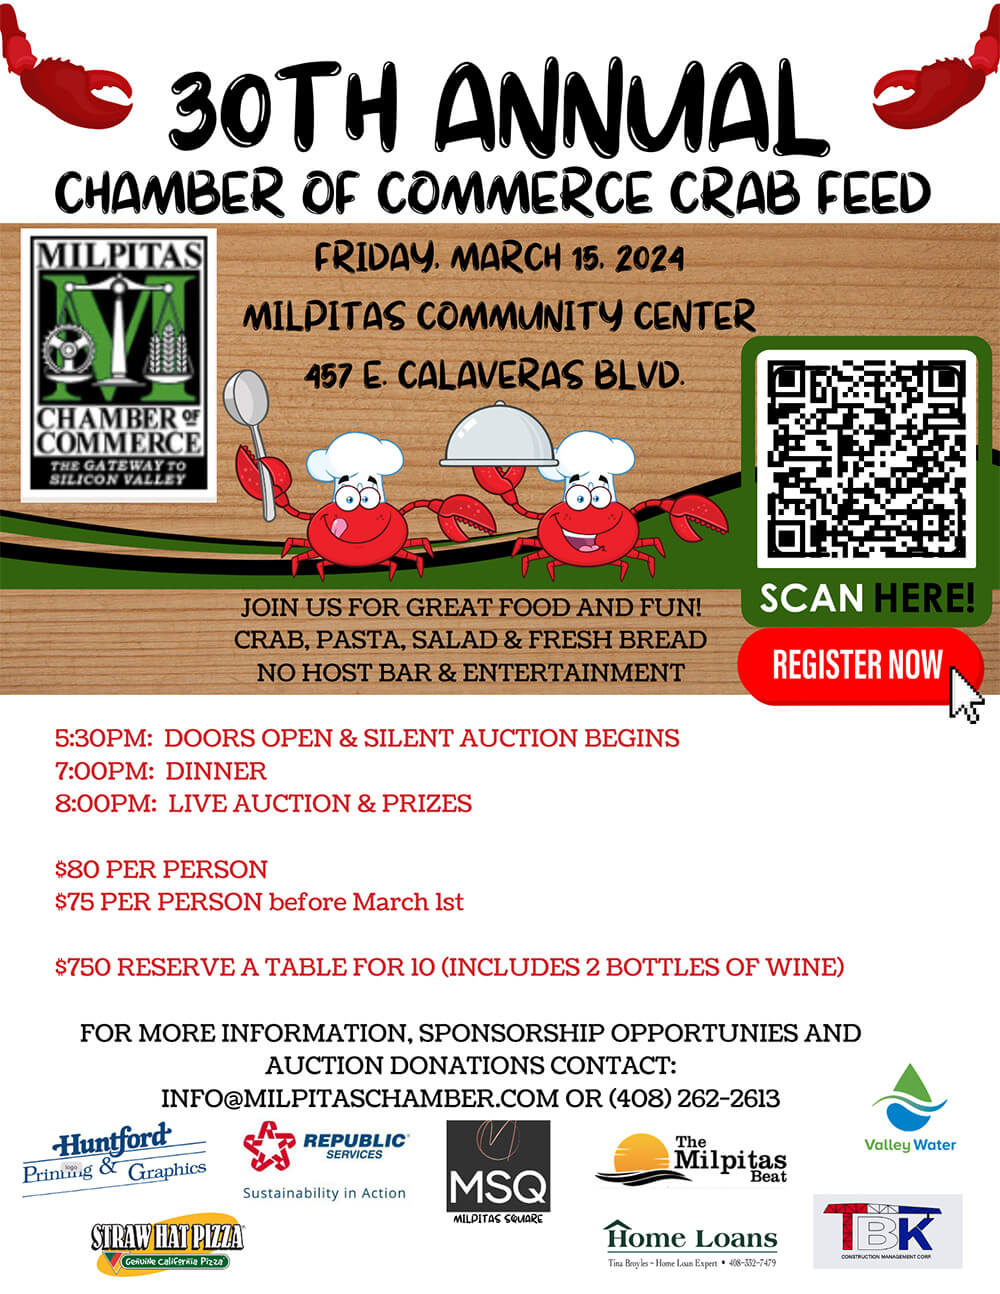 30th Annual Chamber of Commerce Crab Feed